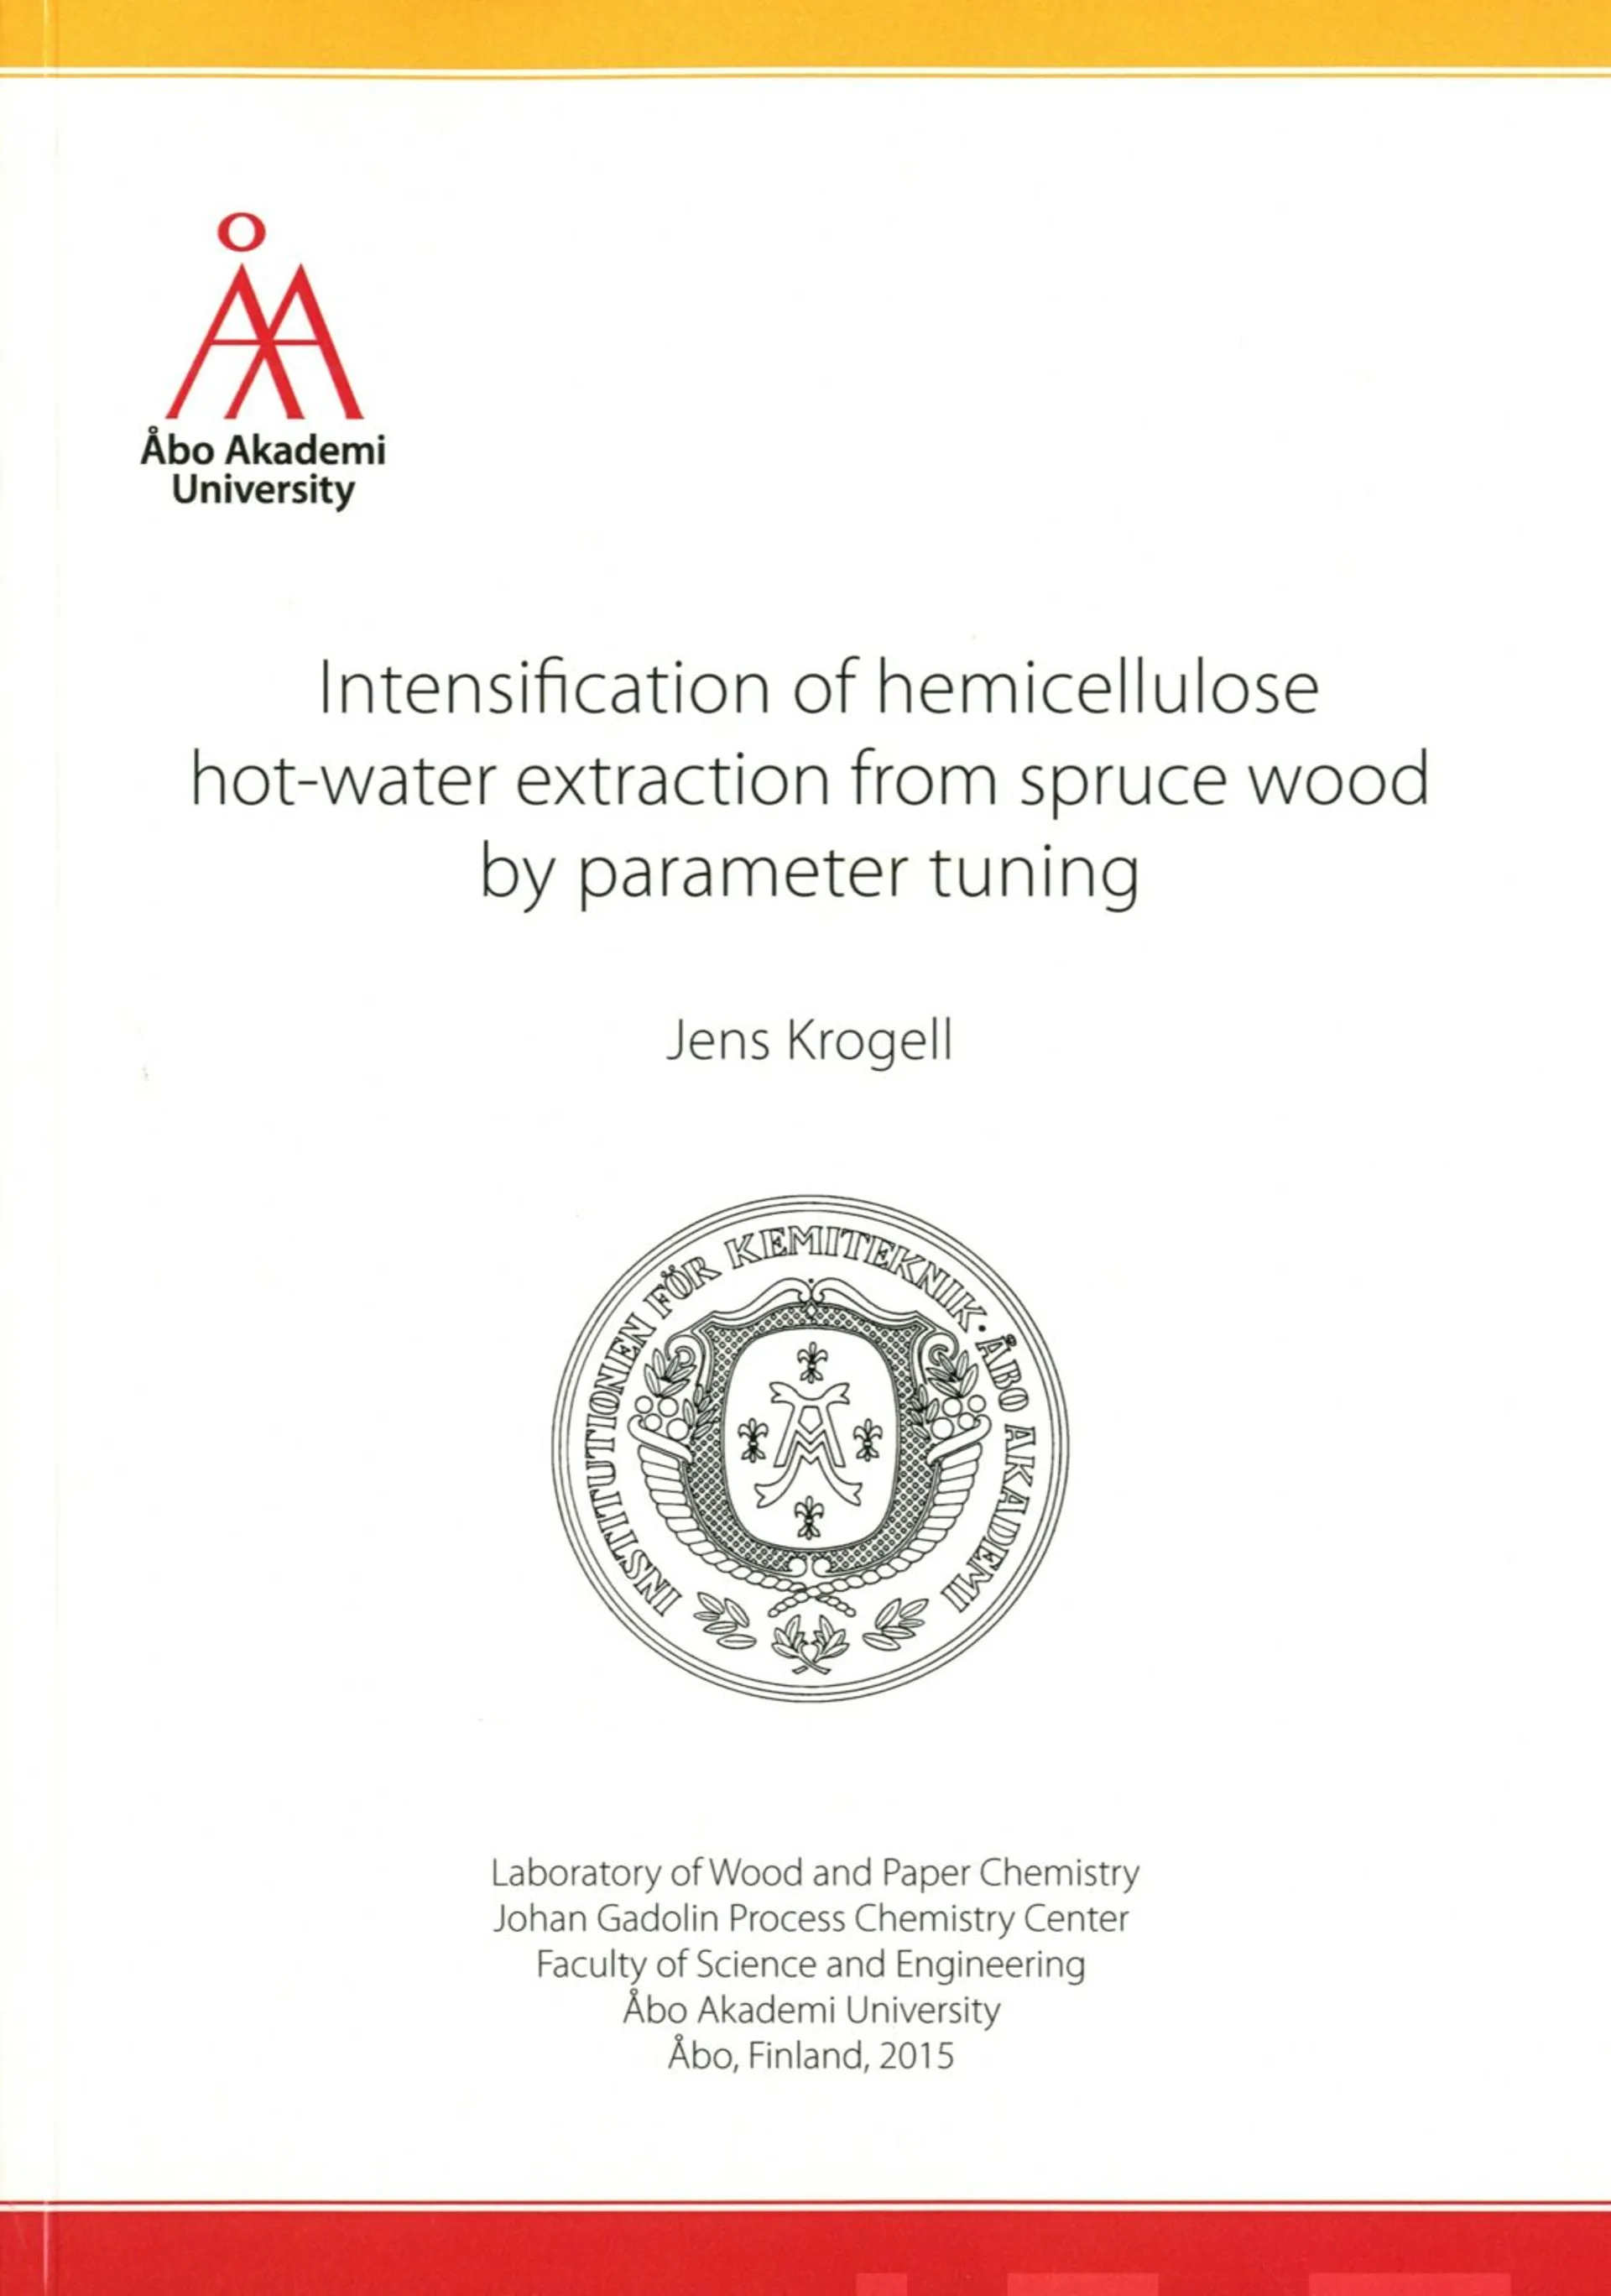 Krogell, Intensification of hemicellulose hot-water extraction from spruce wood by parameter tuning